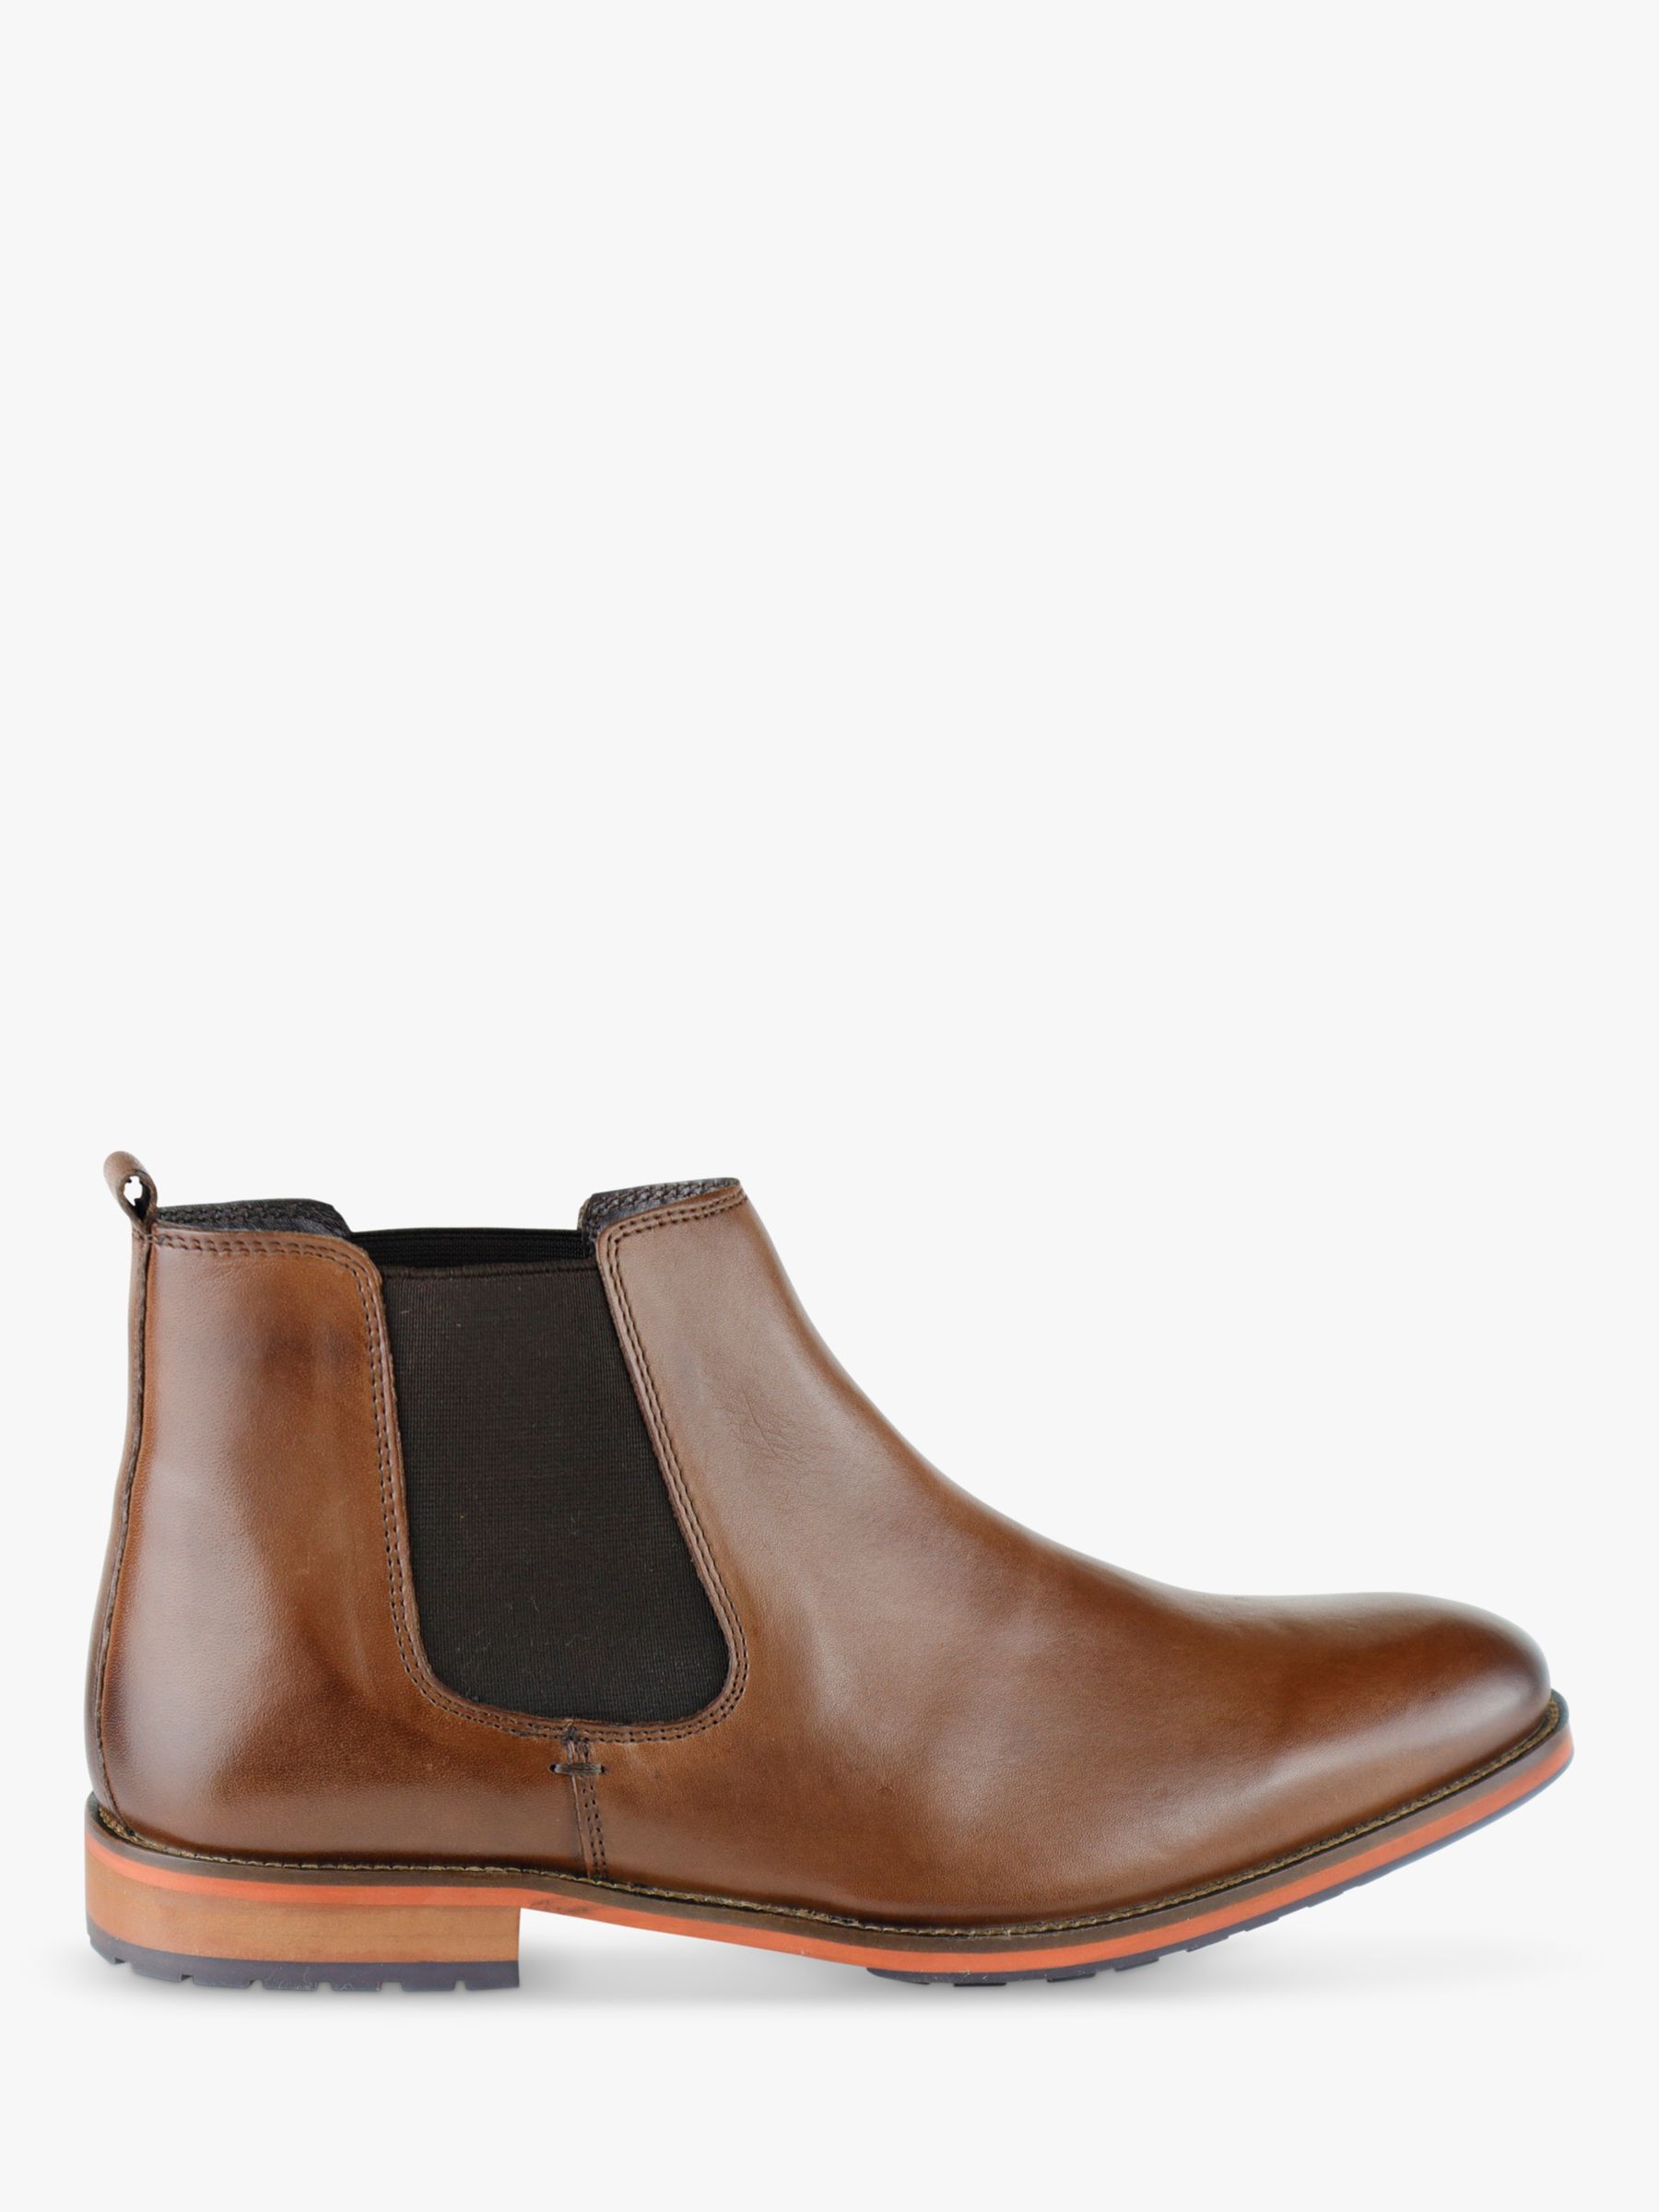 Silver Street London Argyll Leather Chelsea Boots, Brown at John Lewis ...